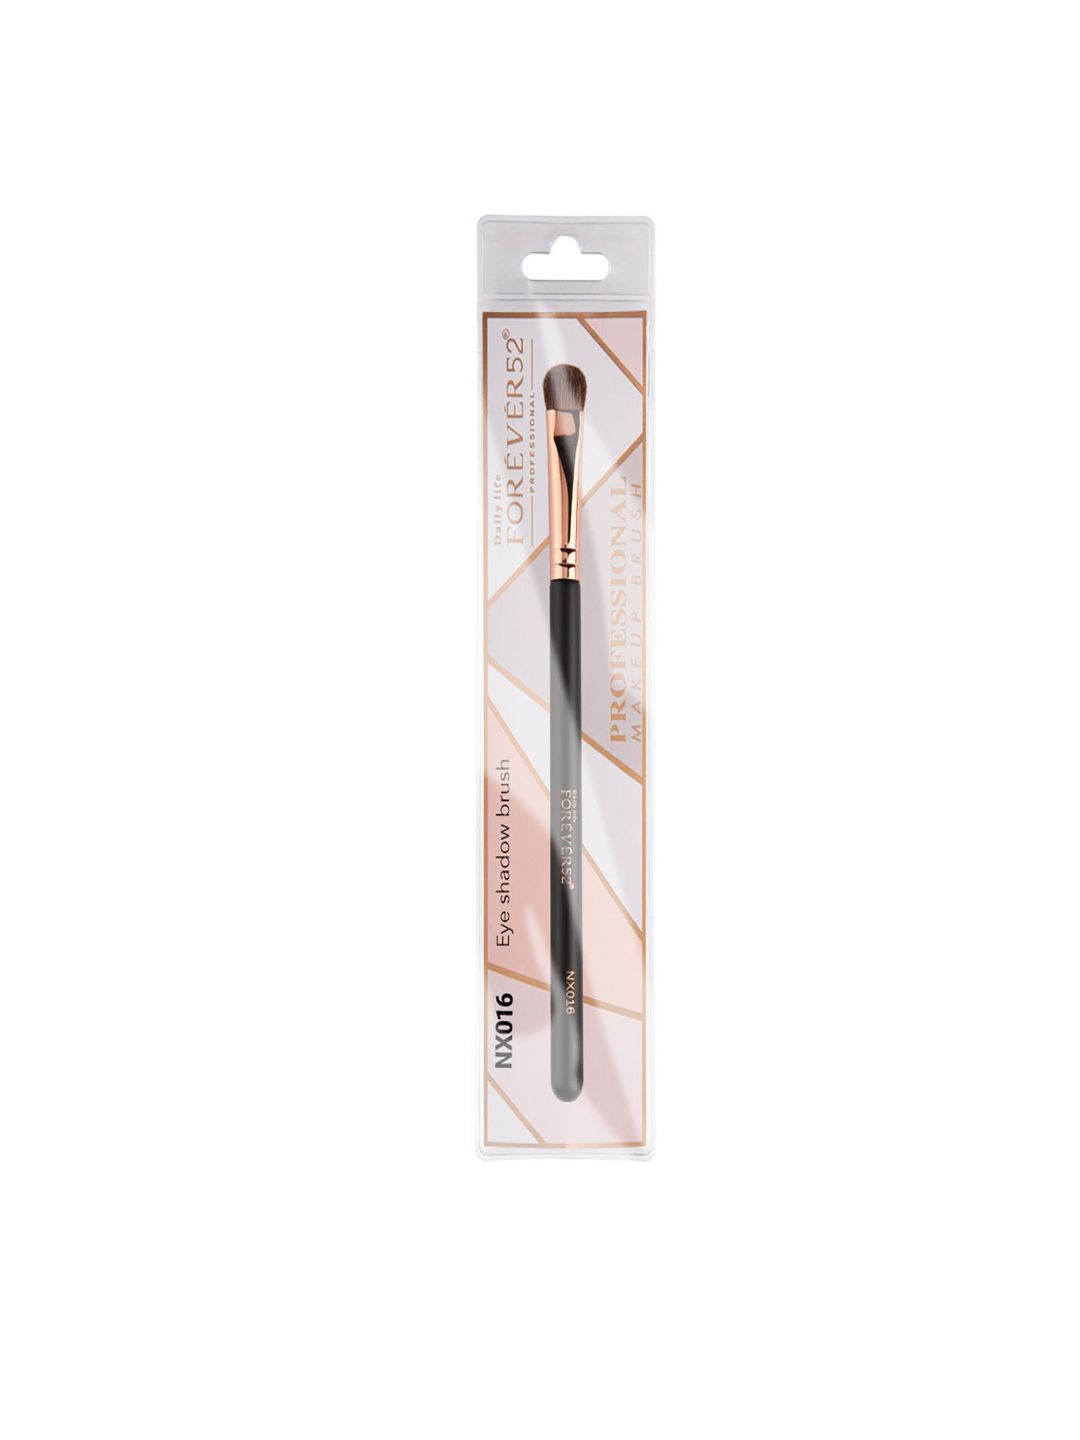 Daily Life Forever52 Eye shadow brush NX016 Price in India